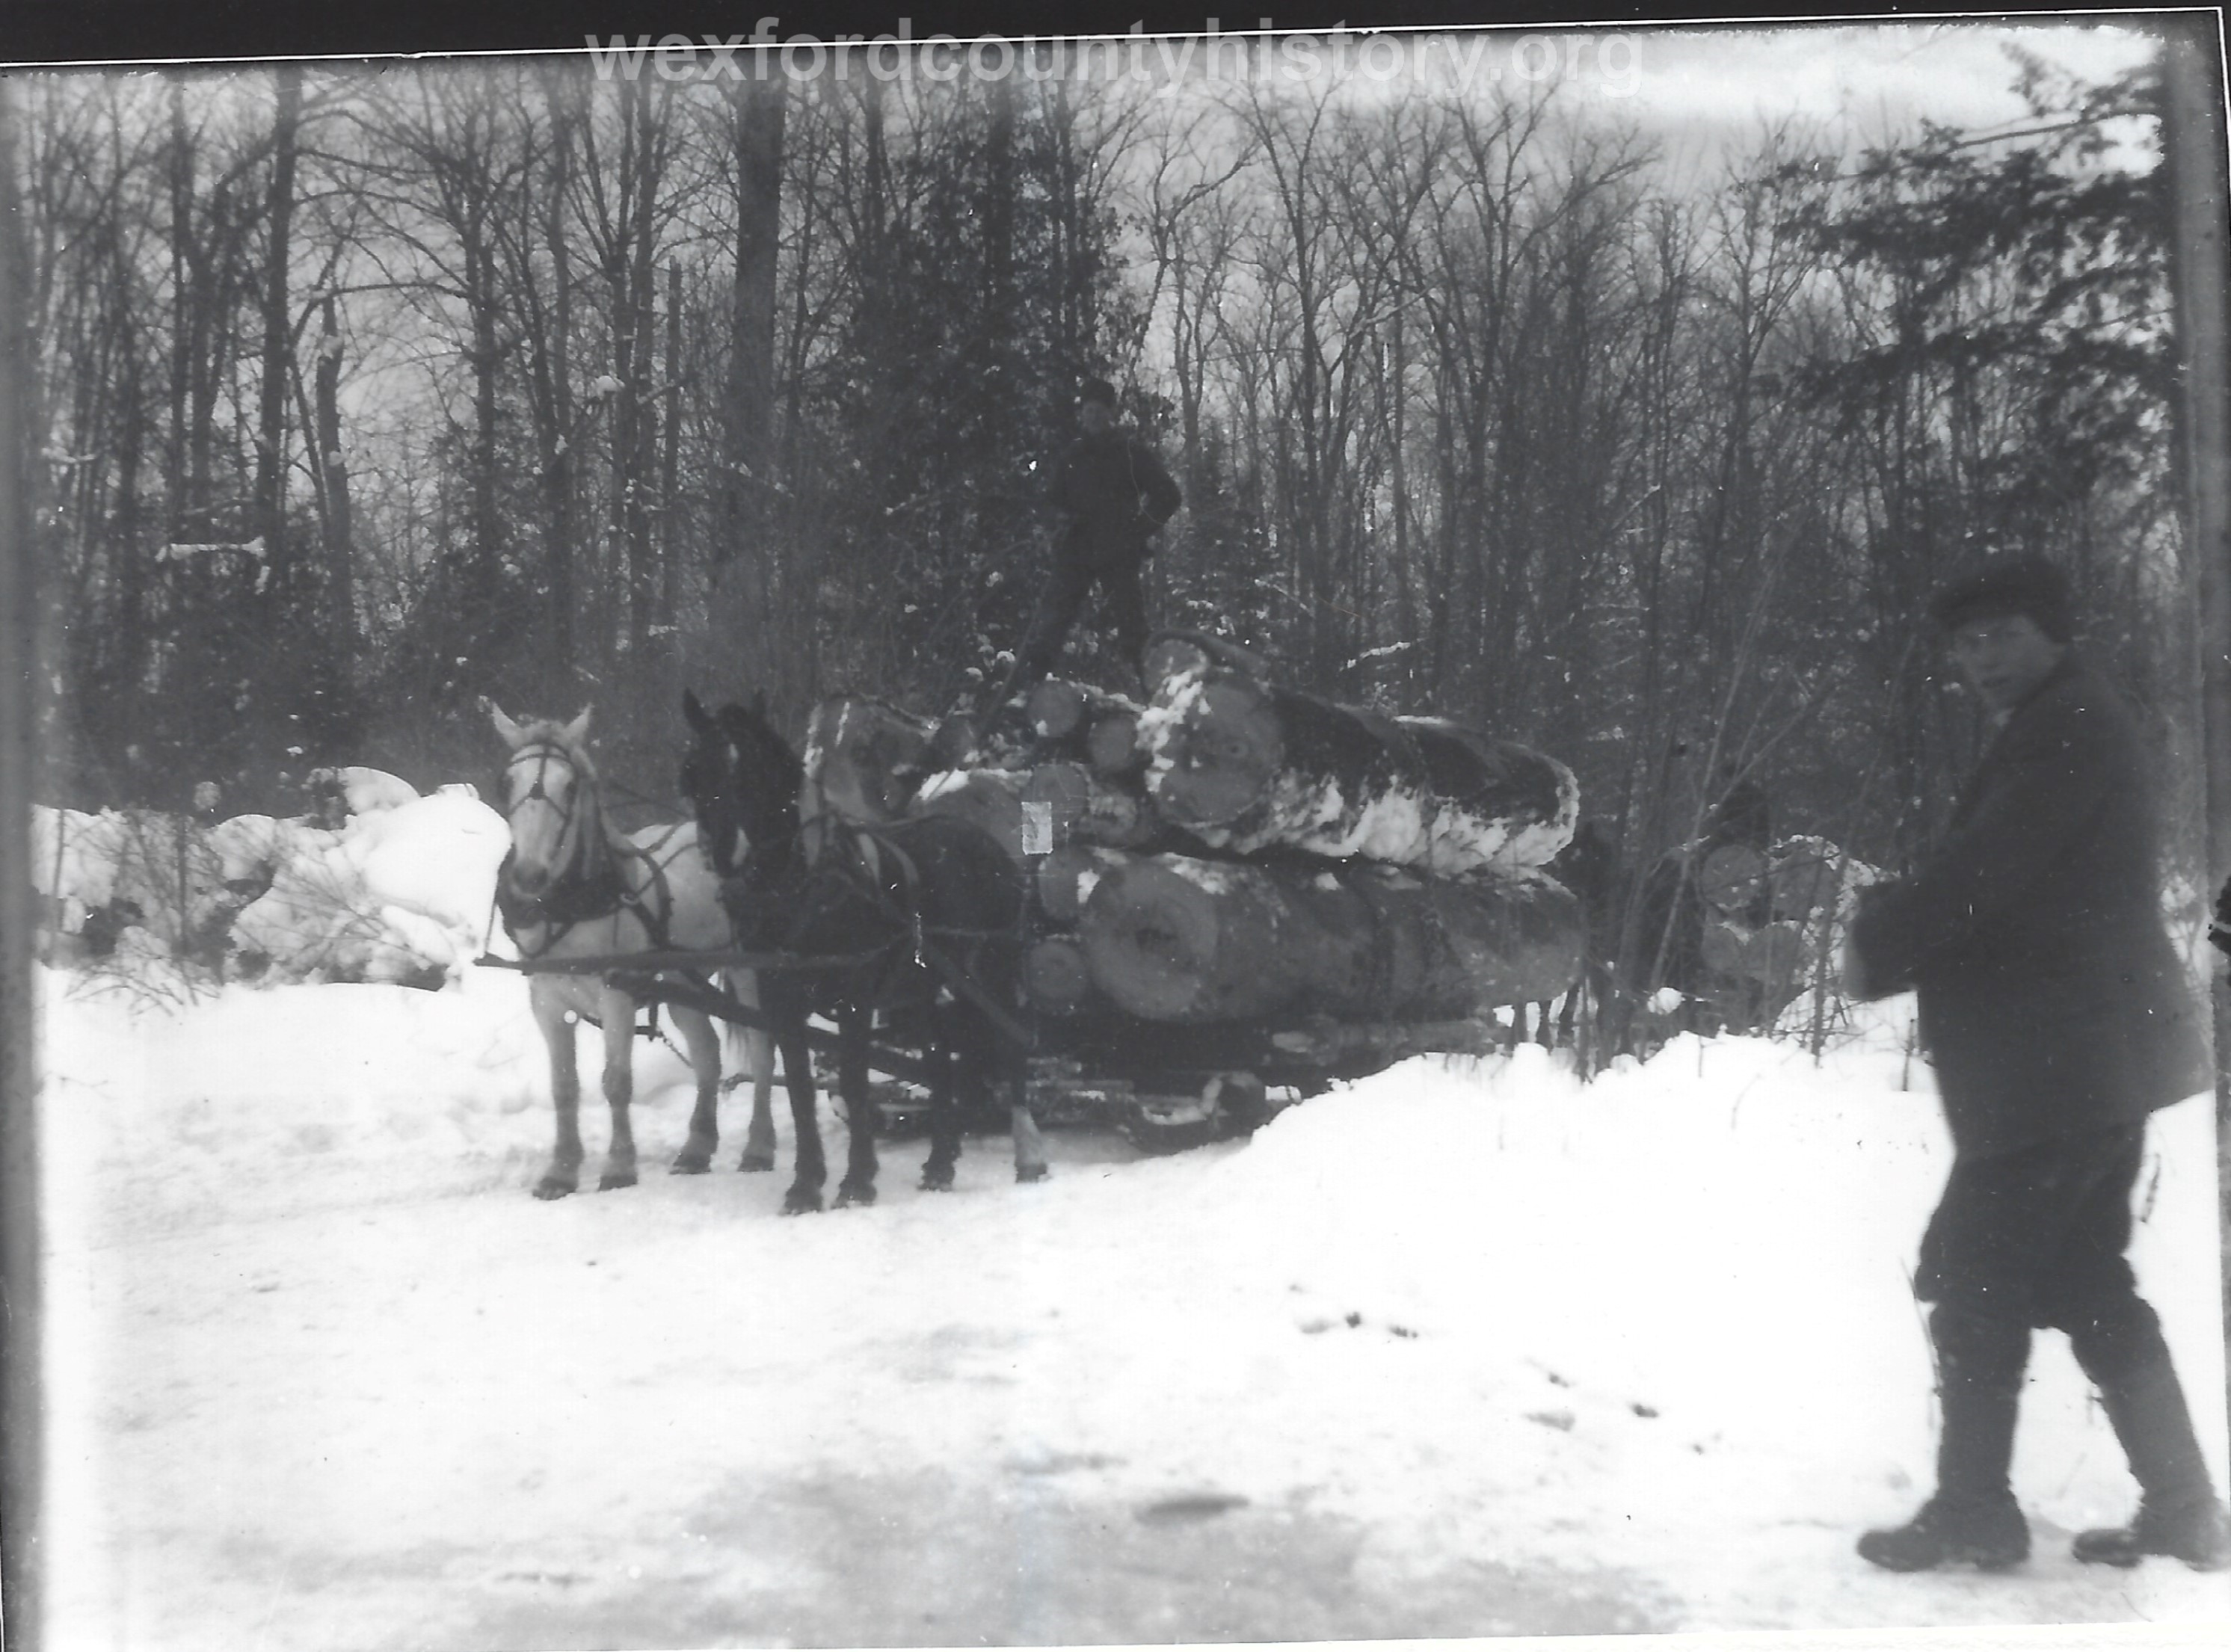 Cadillac-Lumber-Horse-Team-Pulling-Load-Of-Logs-On-Sled-4